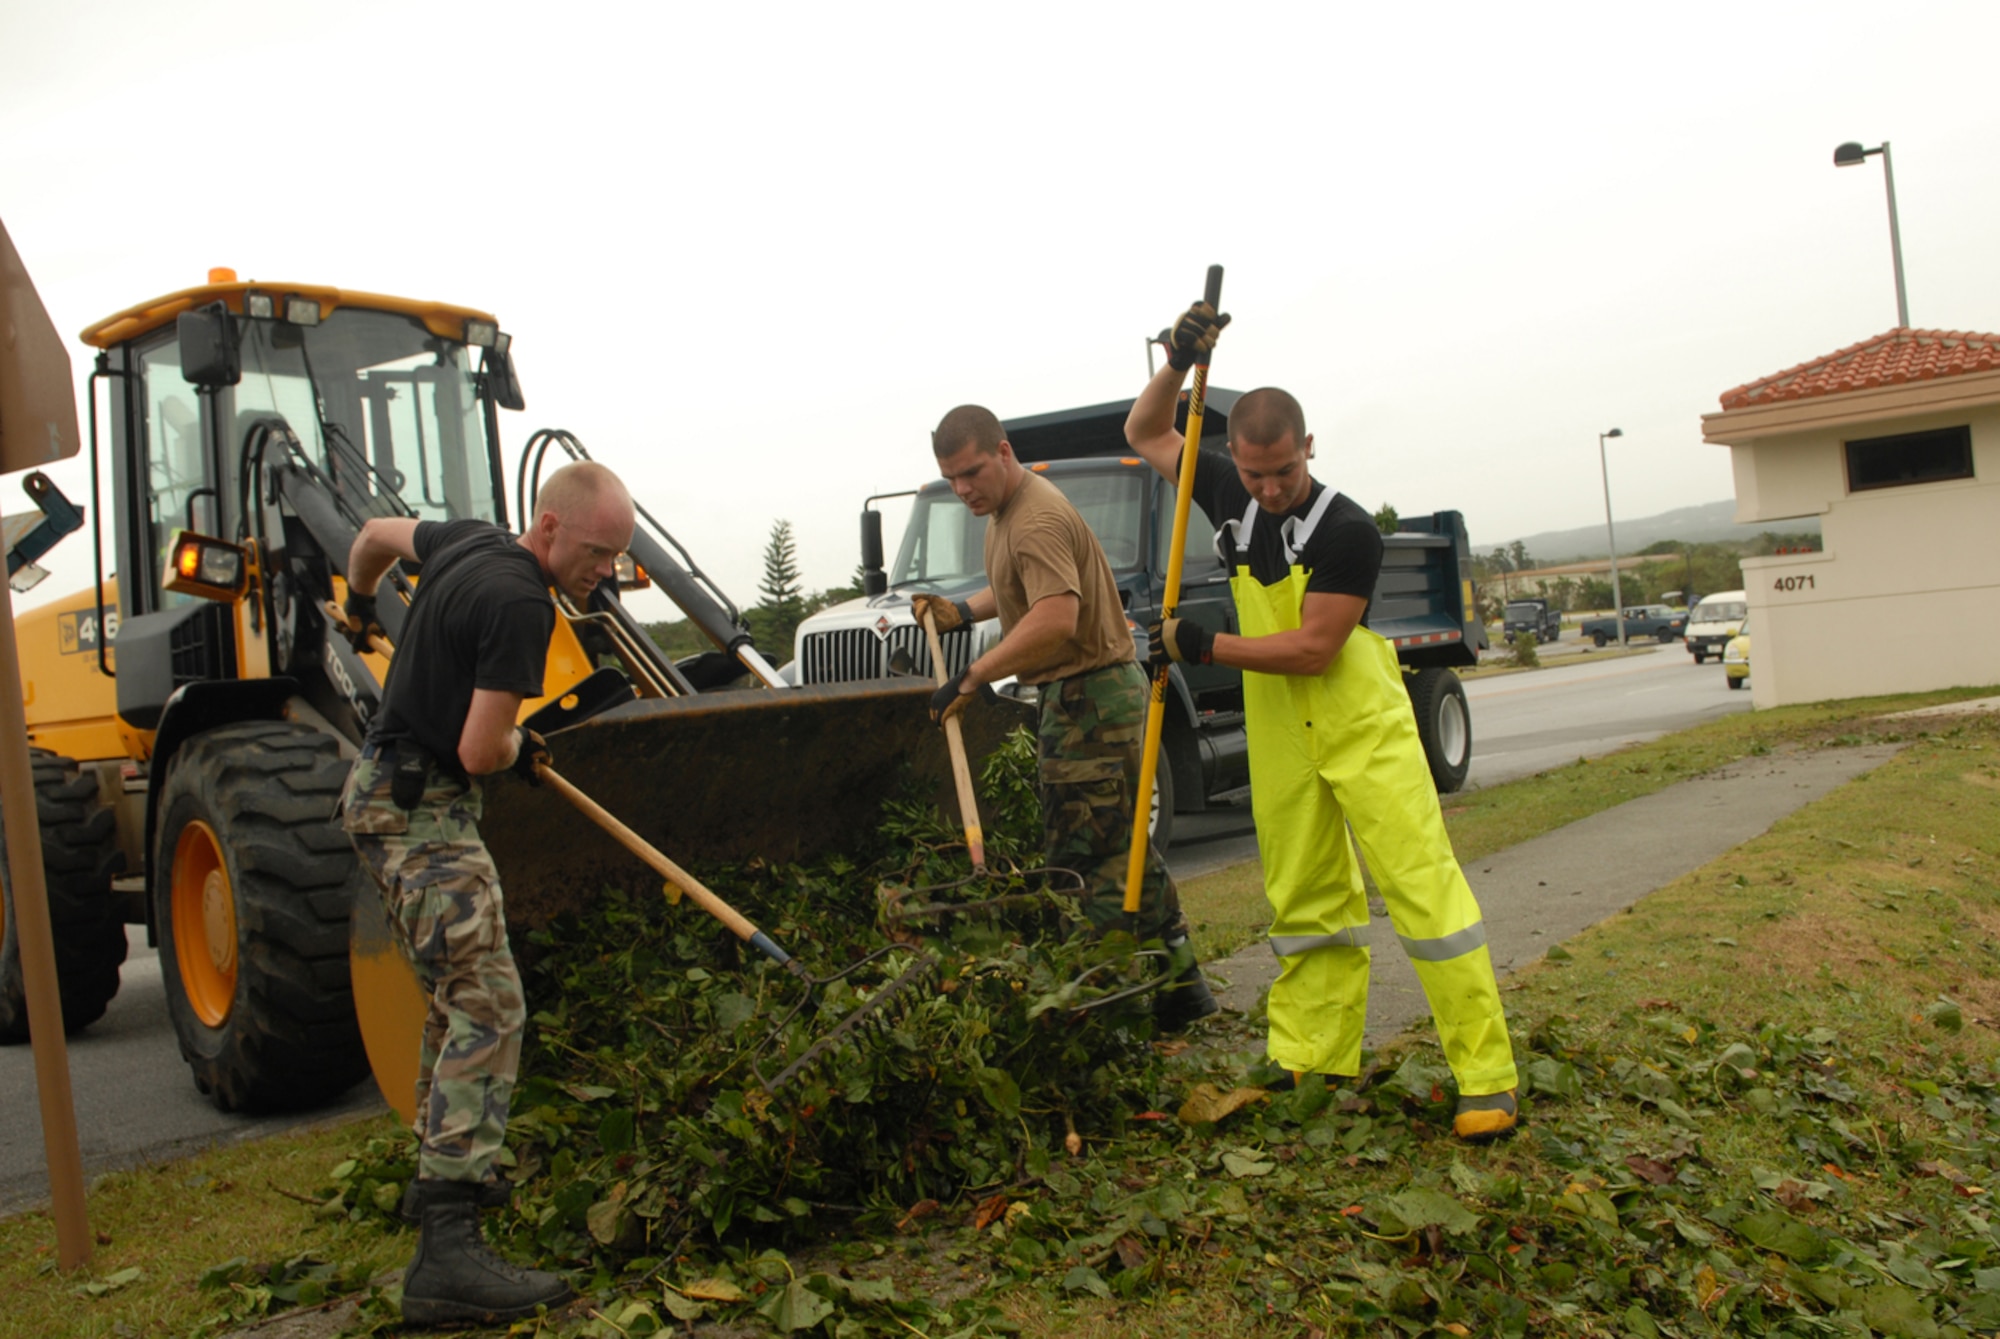 From left:  Staff Sgt. David Sanders and Airmen 1st Class Charles Grandy and  Thomas Fern remove debris from a drain onto a bulldozer at Kadena Air Base, Japan, July 14, 2007. The debris was a result of Typhoon Man-Yi which brought the base 77 mph winds gusting to 105 mph.  There were no injuries or significant damages to base structures.  The typhoon was the strongest to hit the base since 2003.  All are assigned to the 18th Civil Engineer Squadron.  (U.S. Air Force Photo by Staff Sgt. Chrissy FitzGerald